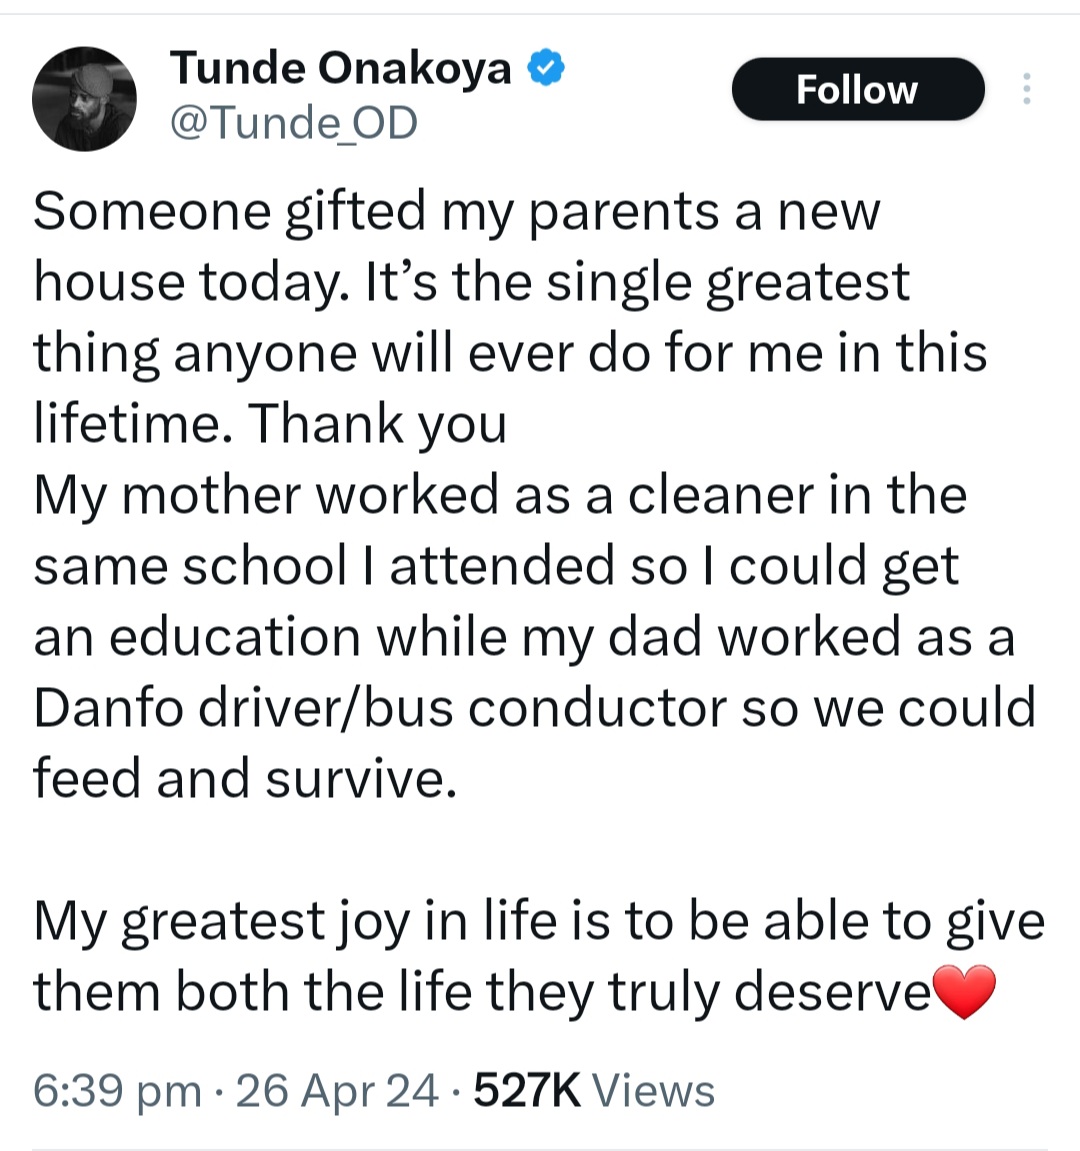 Nigerian chess champion, Tunde Onakoya reveals the huge gift someone gave to his parents